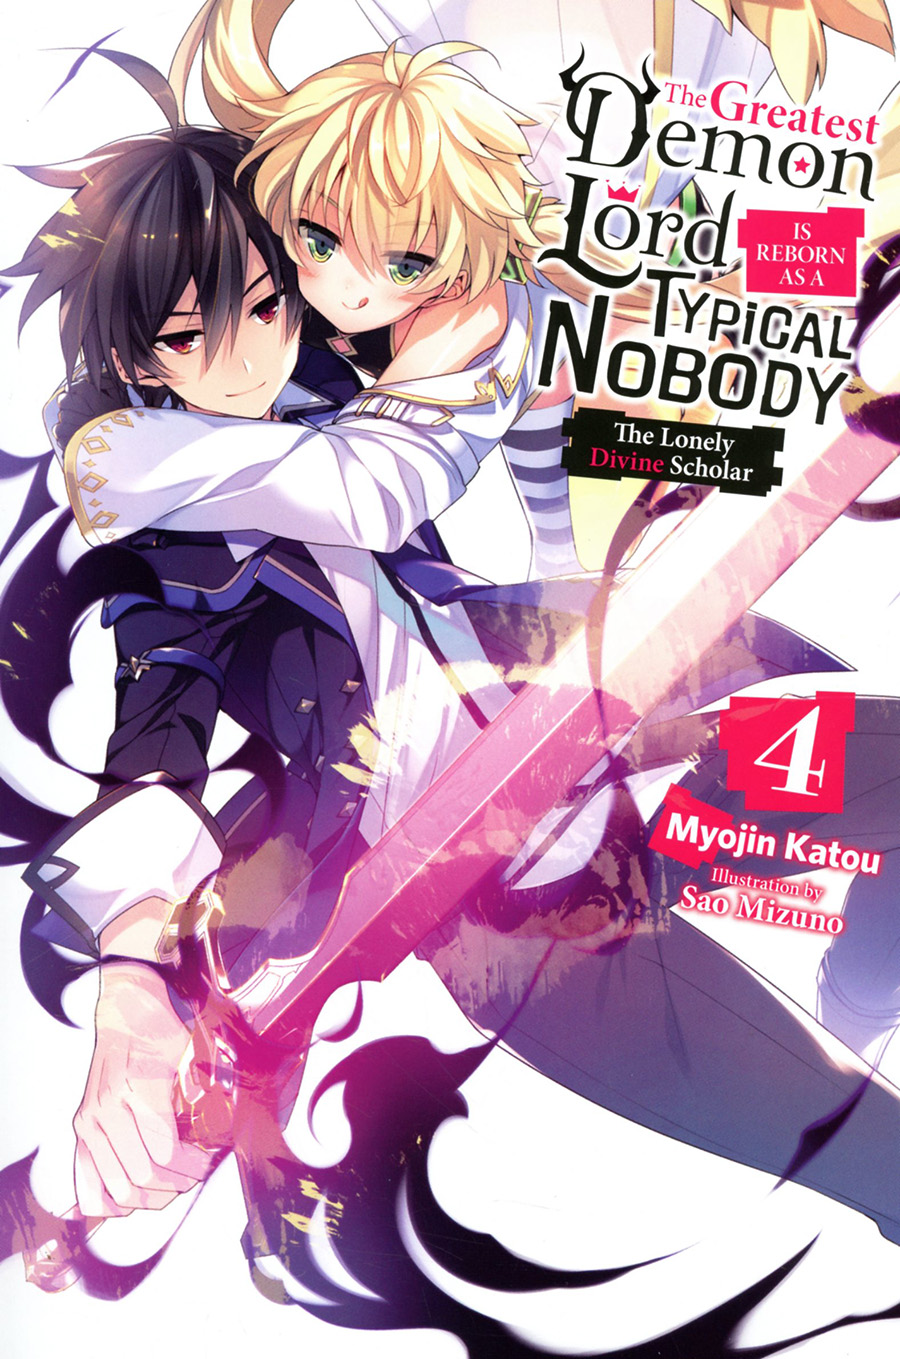 Greatest Demon Lord Is Reborn As A Typical Nobody Light Novel Vol 4 The Lonely Divine Scholar TP